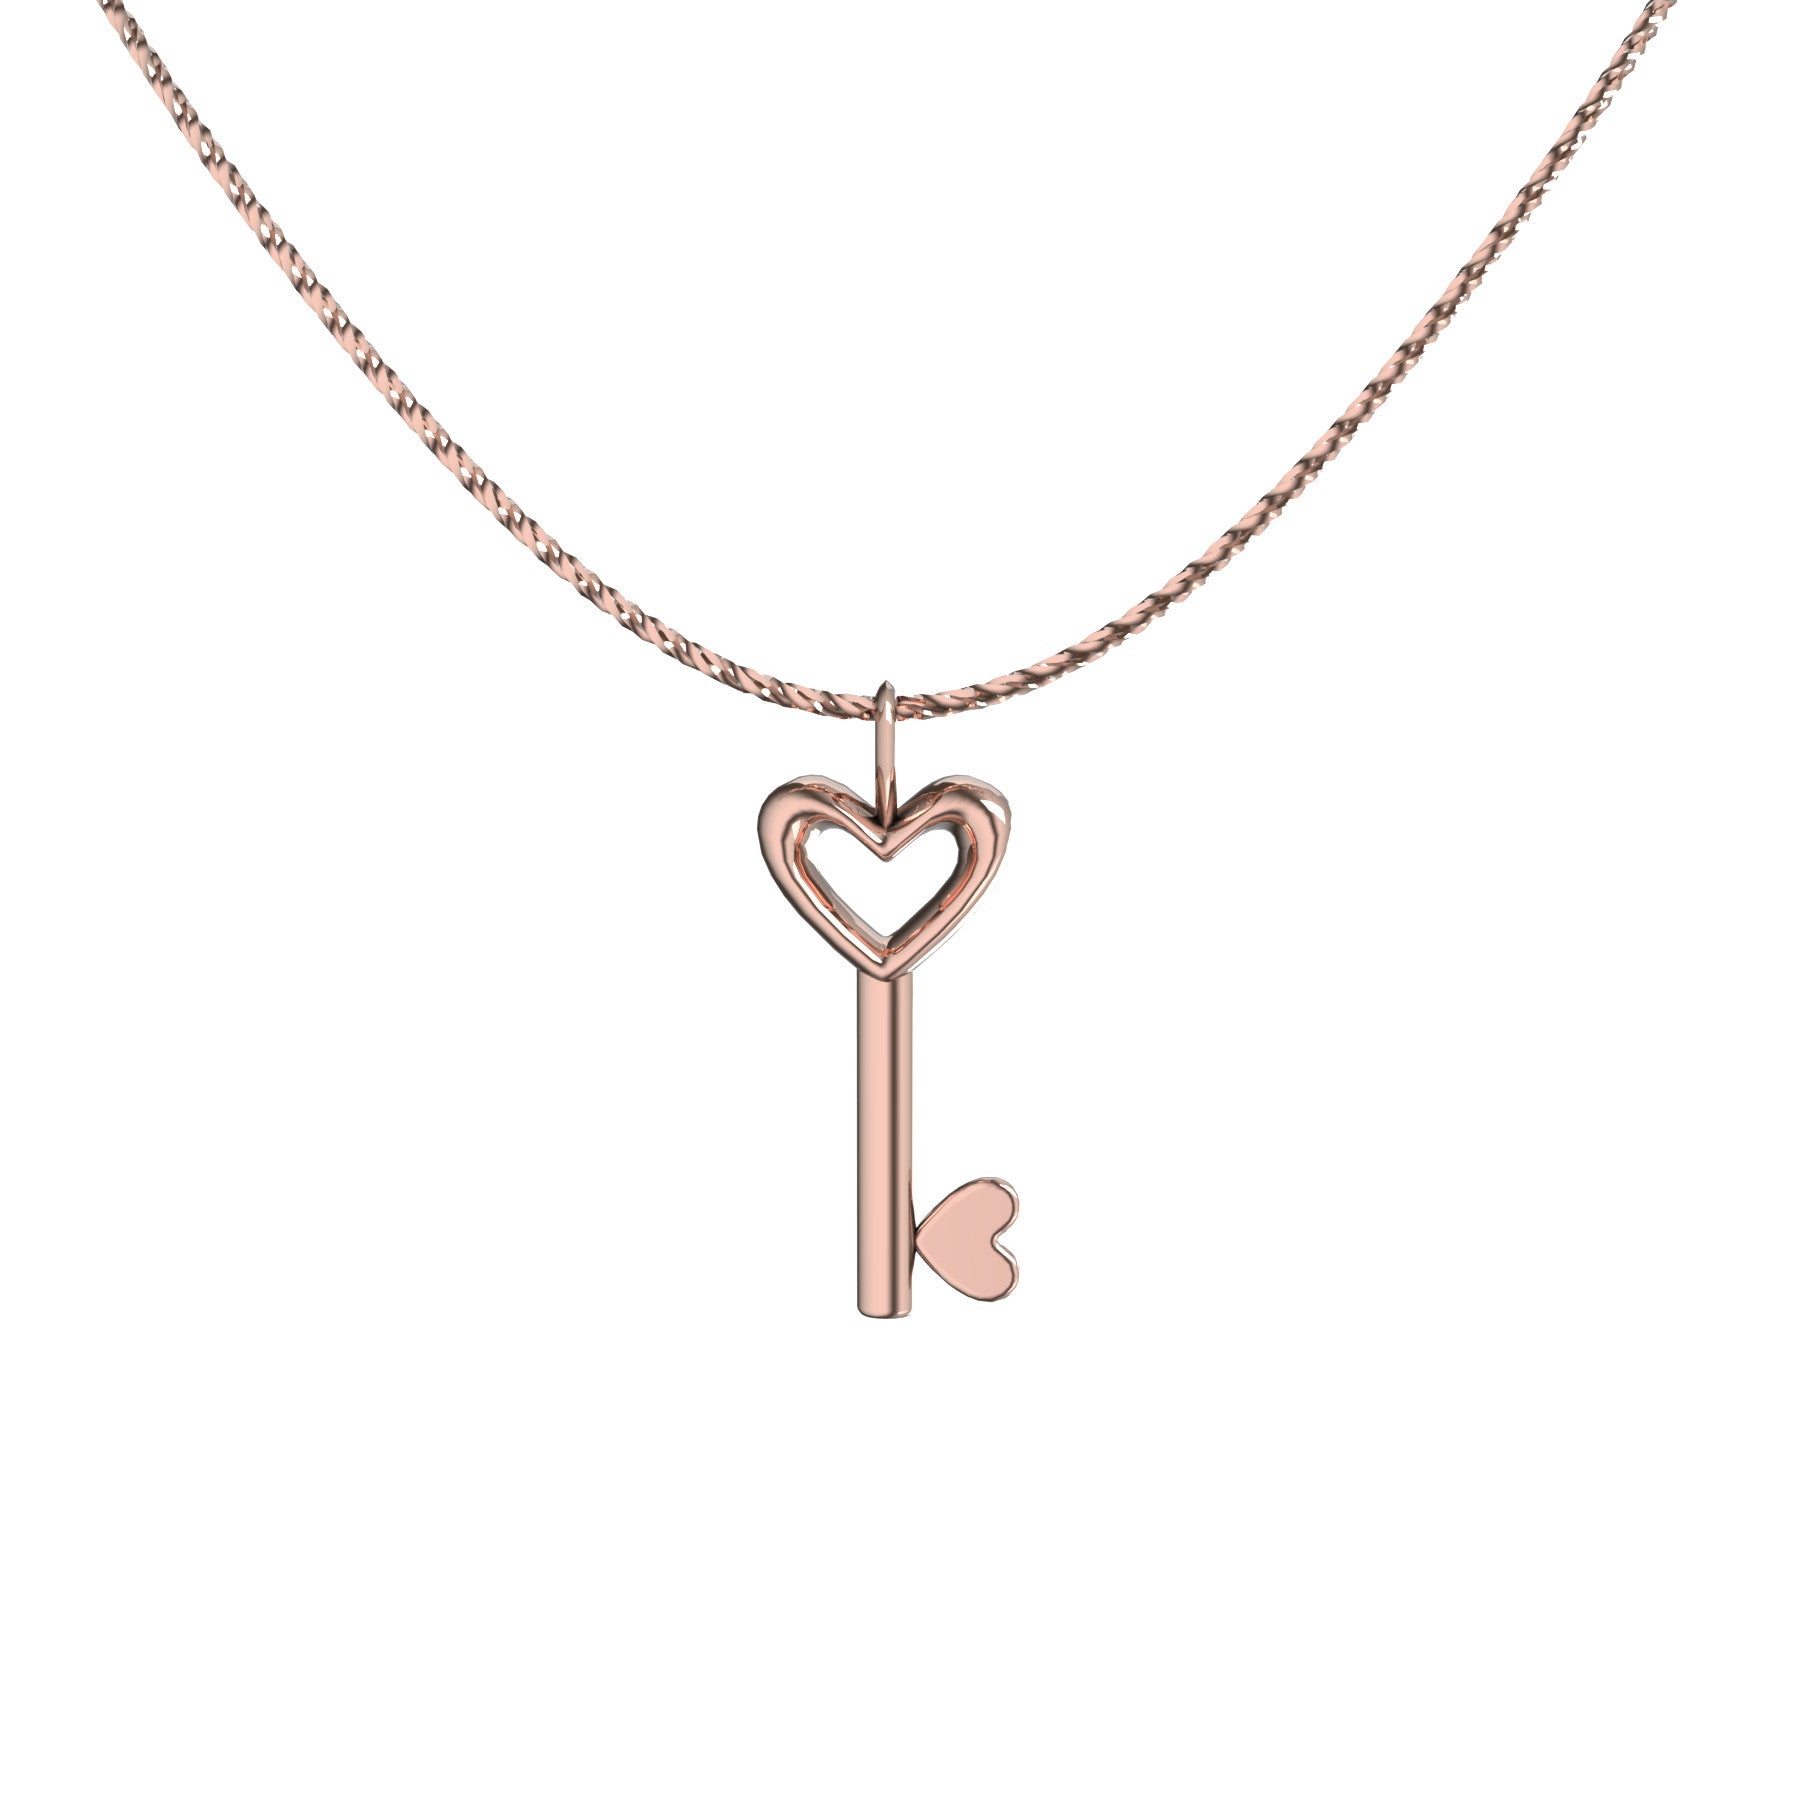 key pendant, 18 k pink gold, weight about 4,2 g (0.15 oz), size 31,9x13,1x4,8 mm